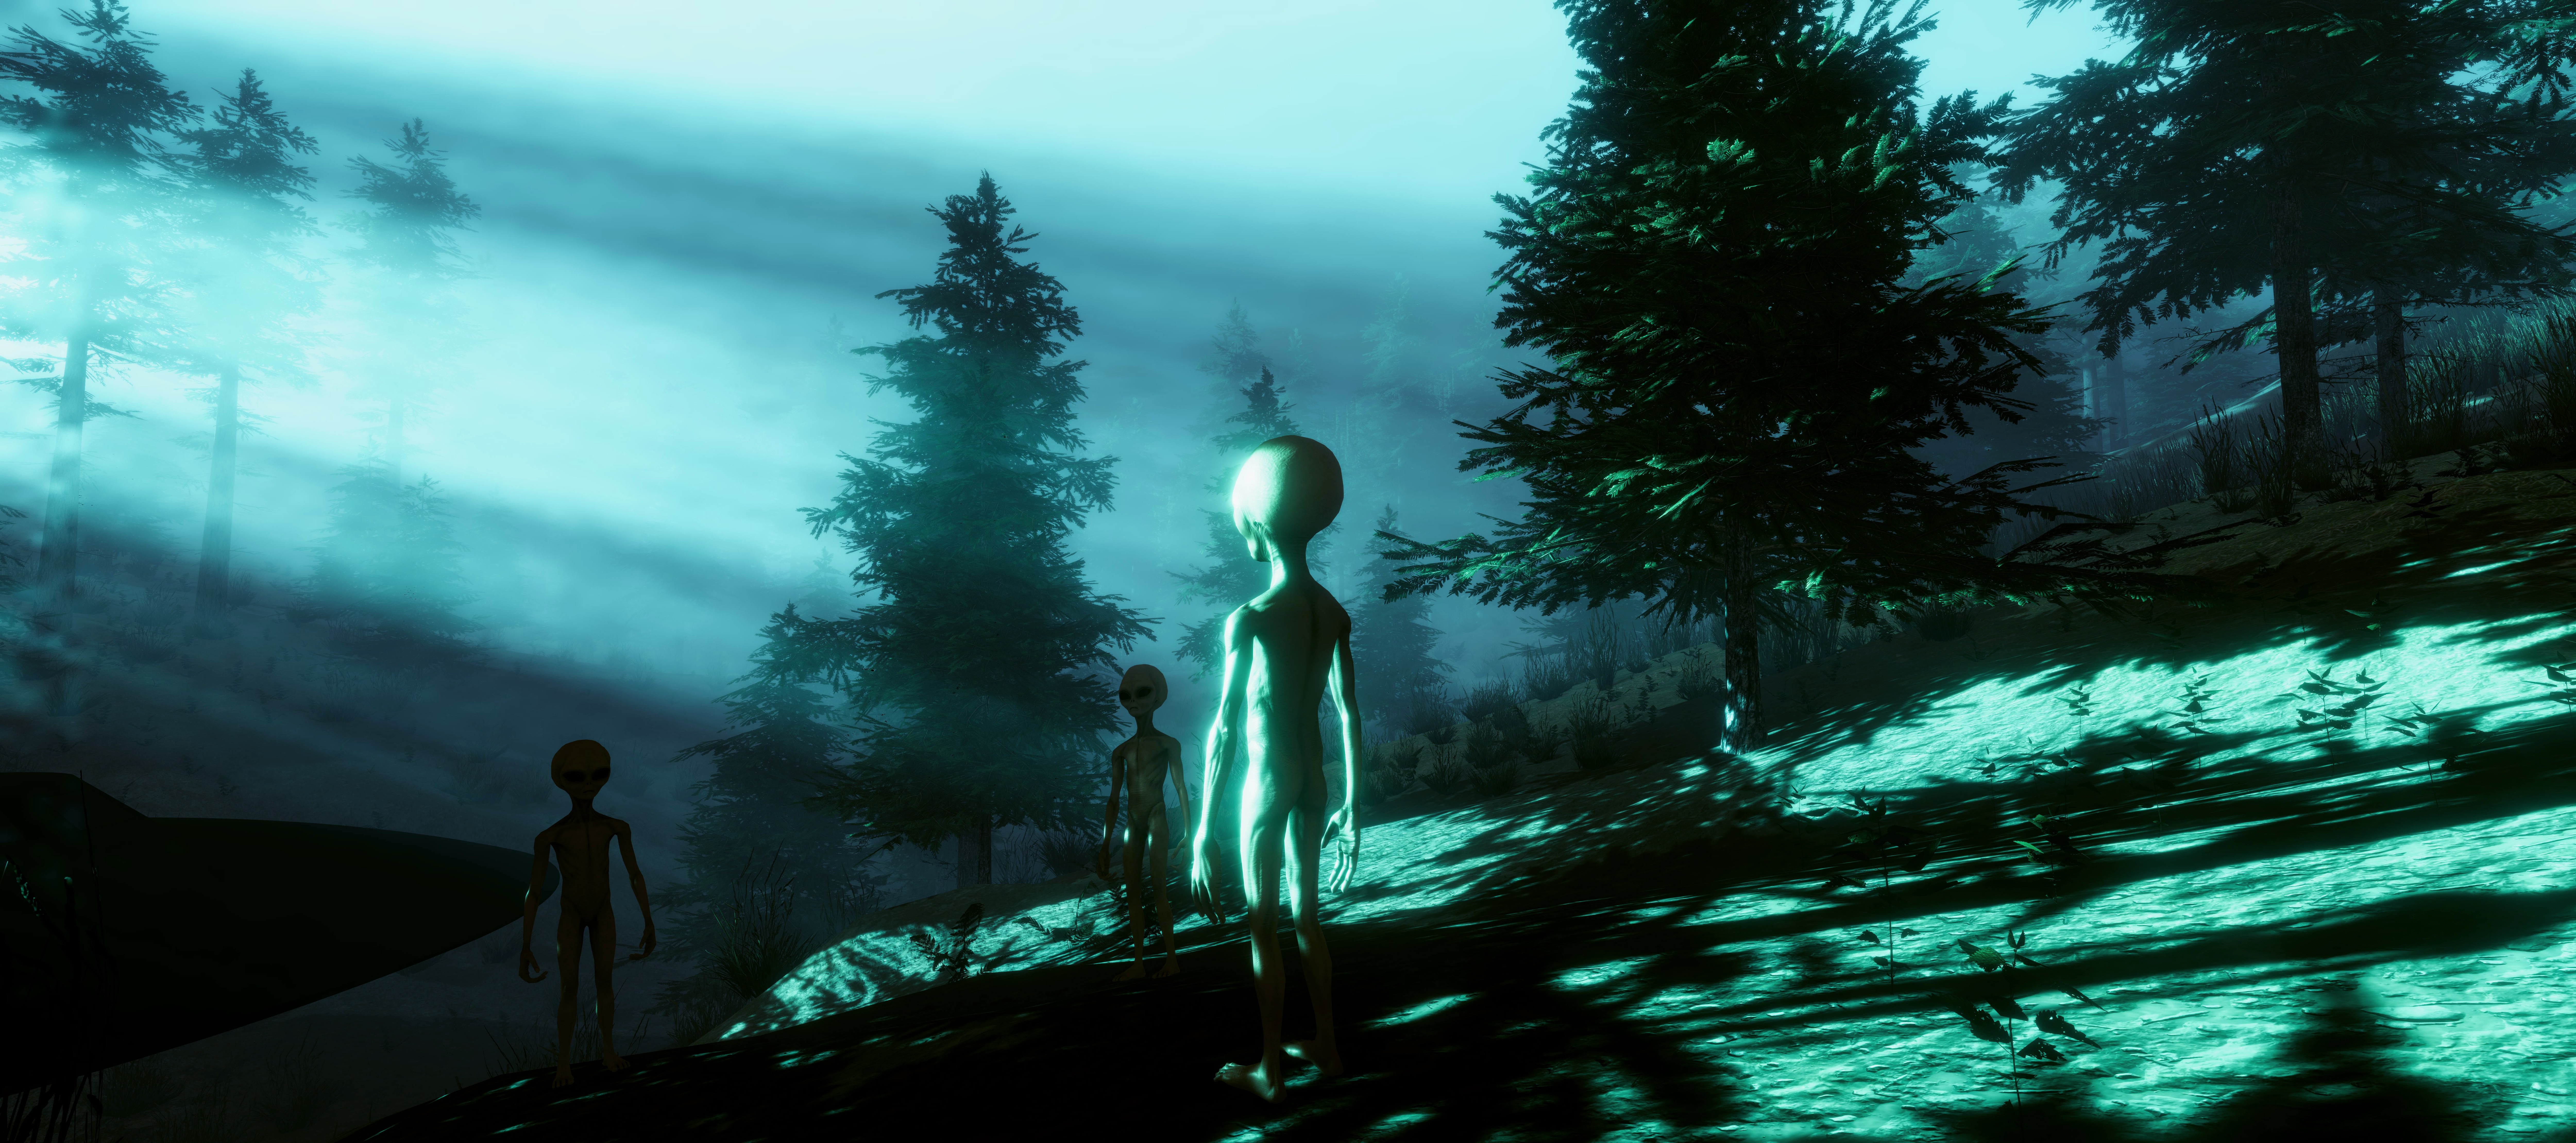 Extremely detailed and realistic high resolution 3d illustration of a Grey Alien standing in a forest